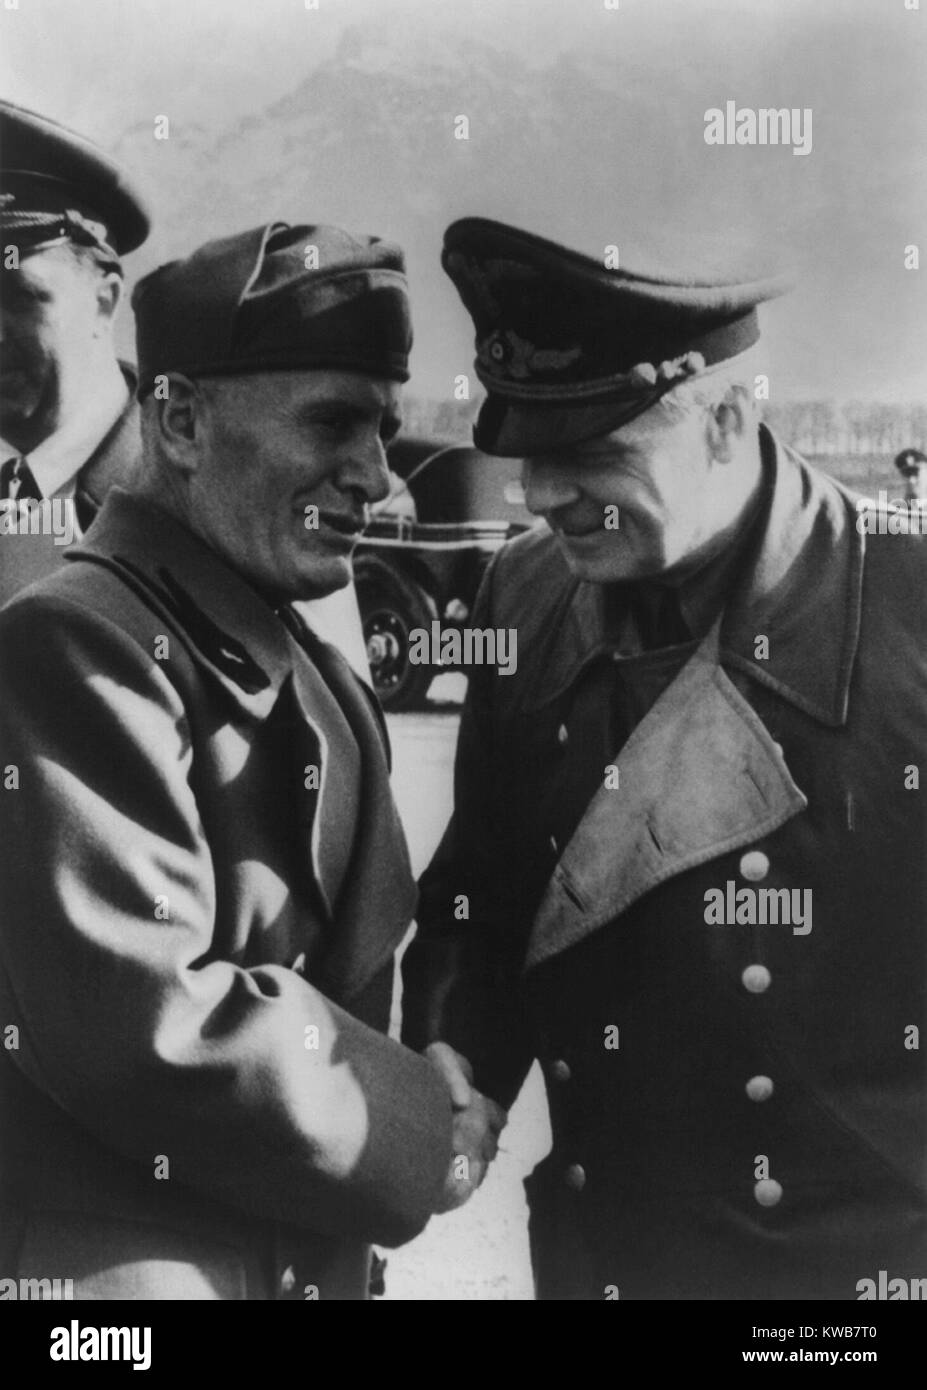 Mussolini greeting Joachim von Ribbentrop, with the German ambassador to Italy, Rudolf Rahn. April 25, 1944. 10 months earlier, Mussolini was ousted and replaced by Marshal Pietro Badoglio who dissolved Fascist party. The Nazis continued to prop up the powerless dictator for another year. World War 2. (BSLOC 2014 8 174) Stock Photo